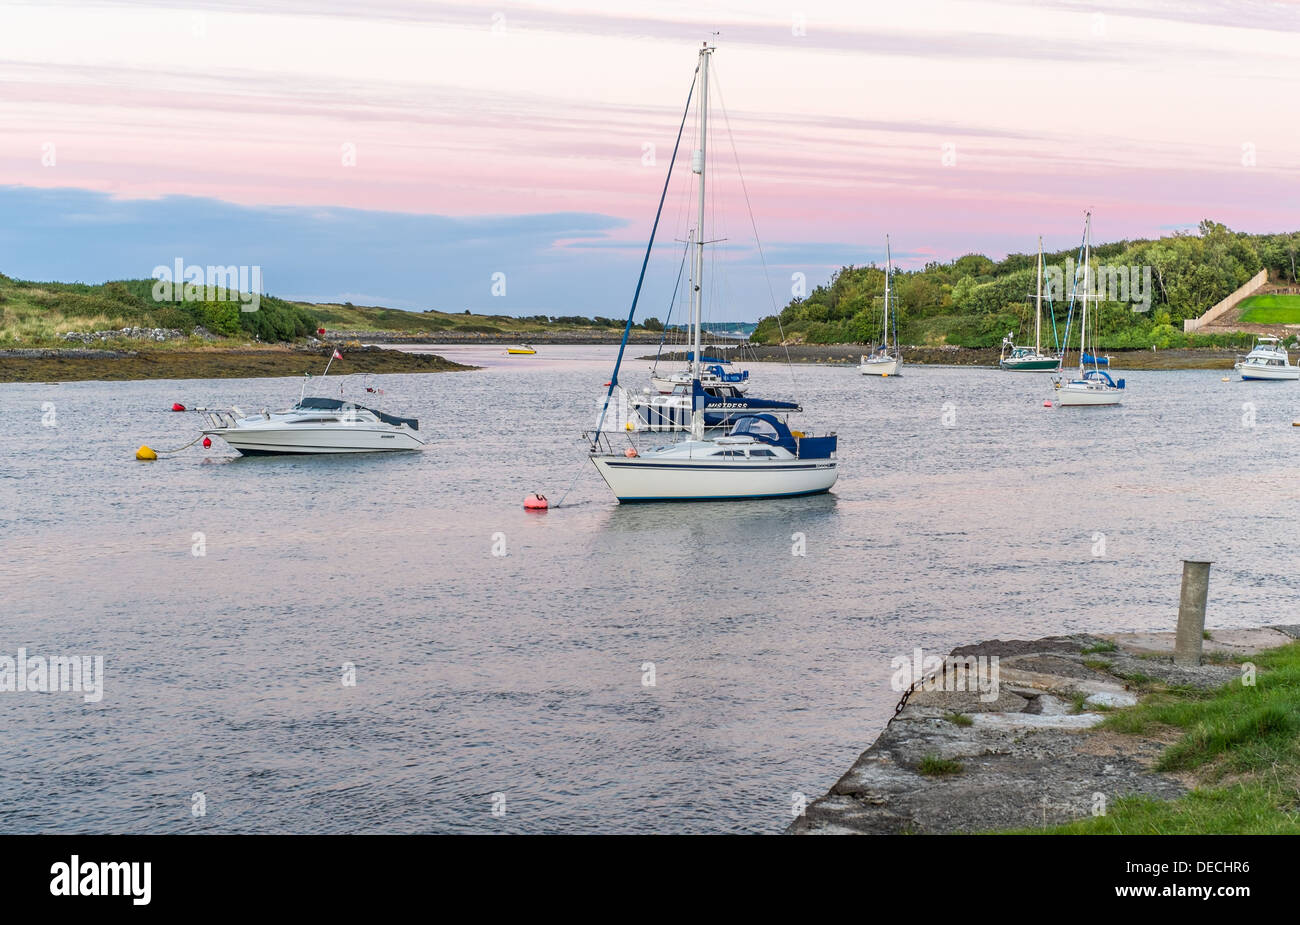 A pale pink sky over Strangford Lough Stock Photo